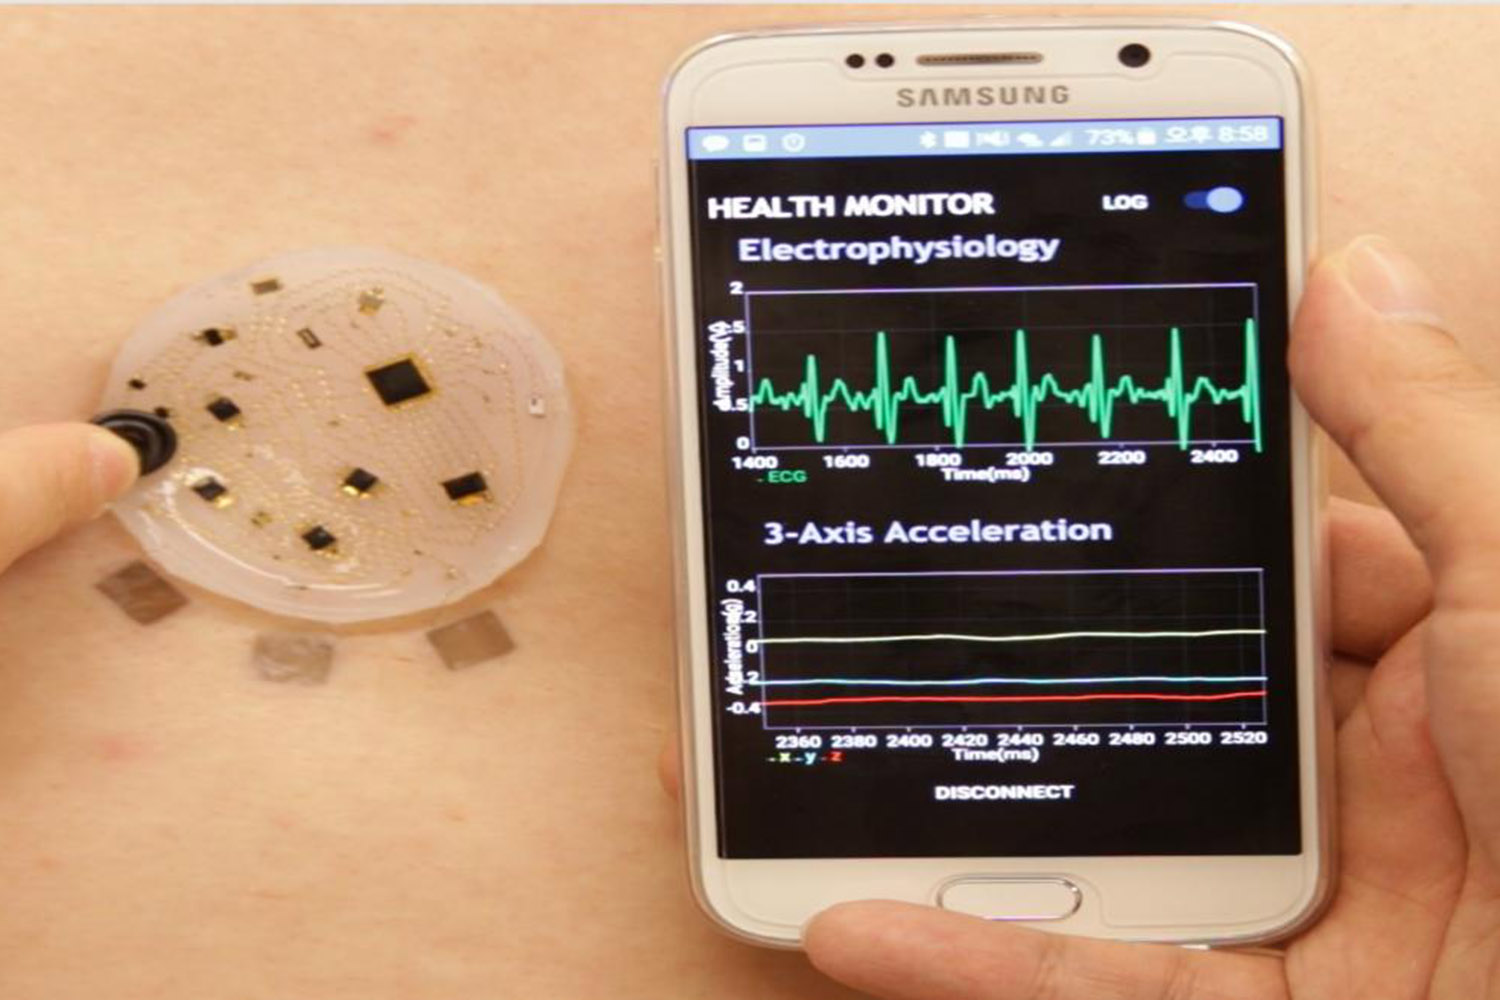 Stick-on patch monitors vitals, wirelessly transmits data to smartphone